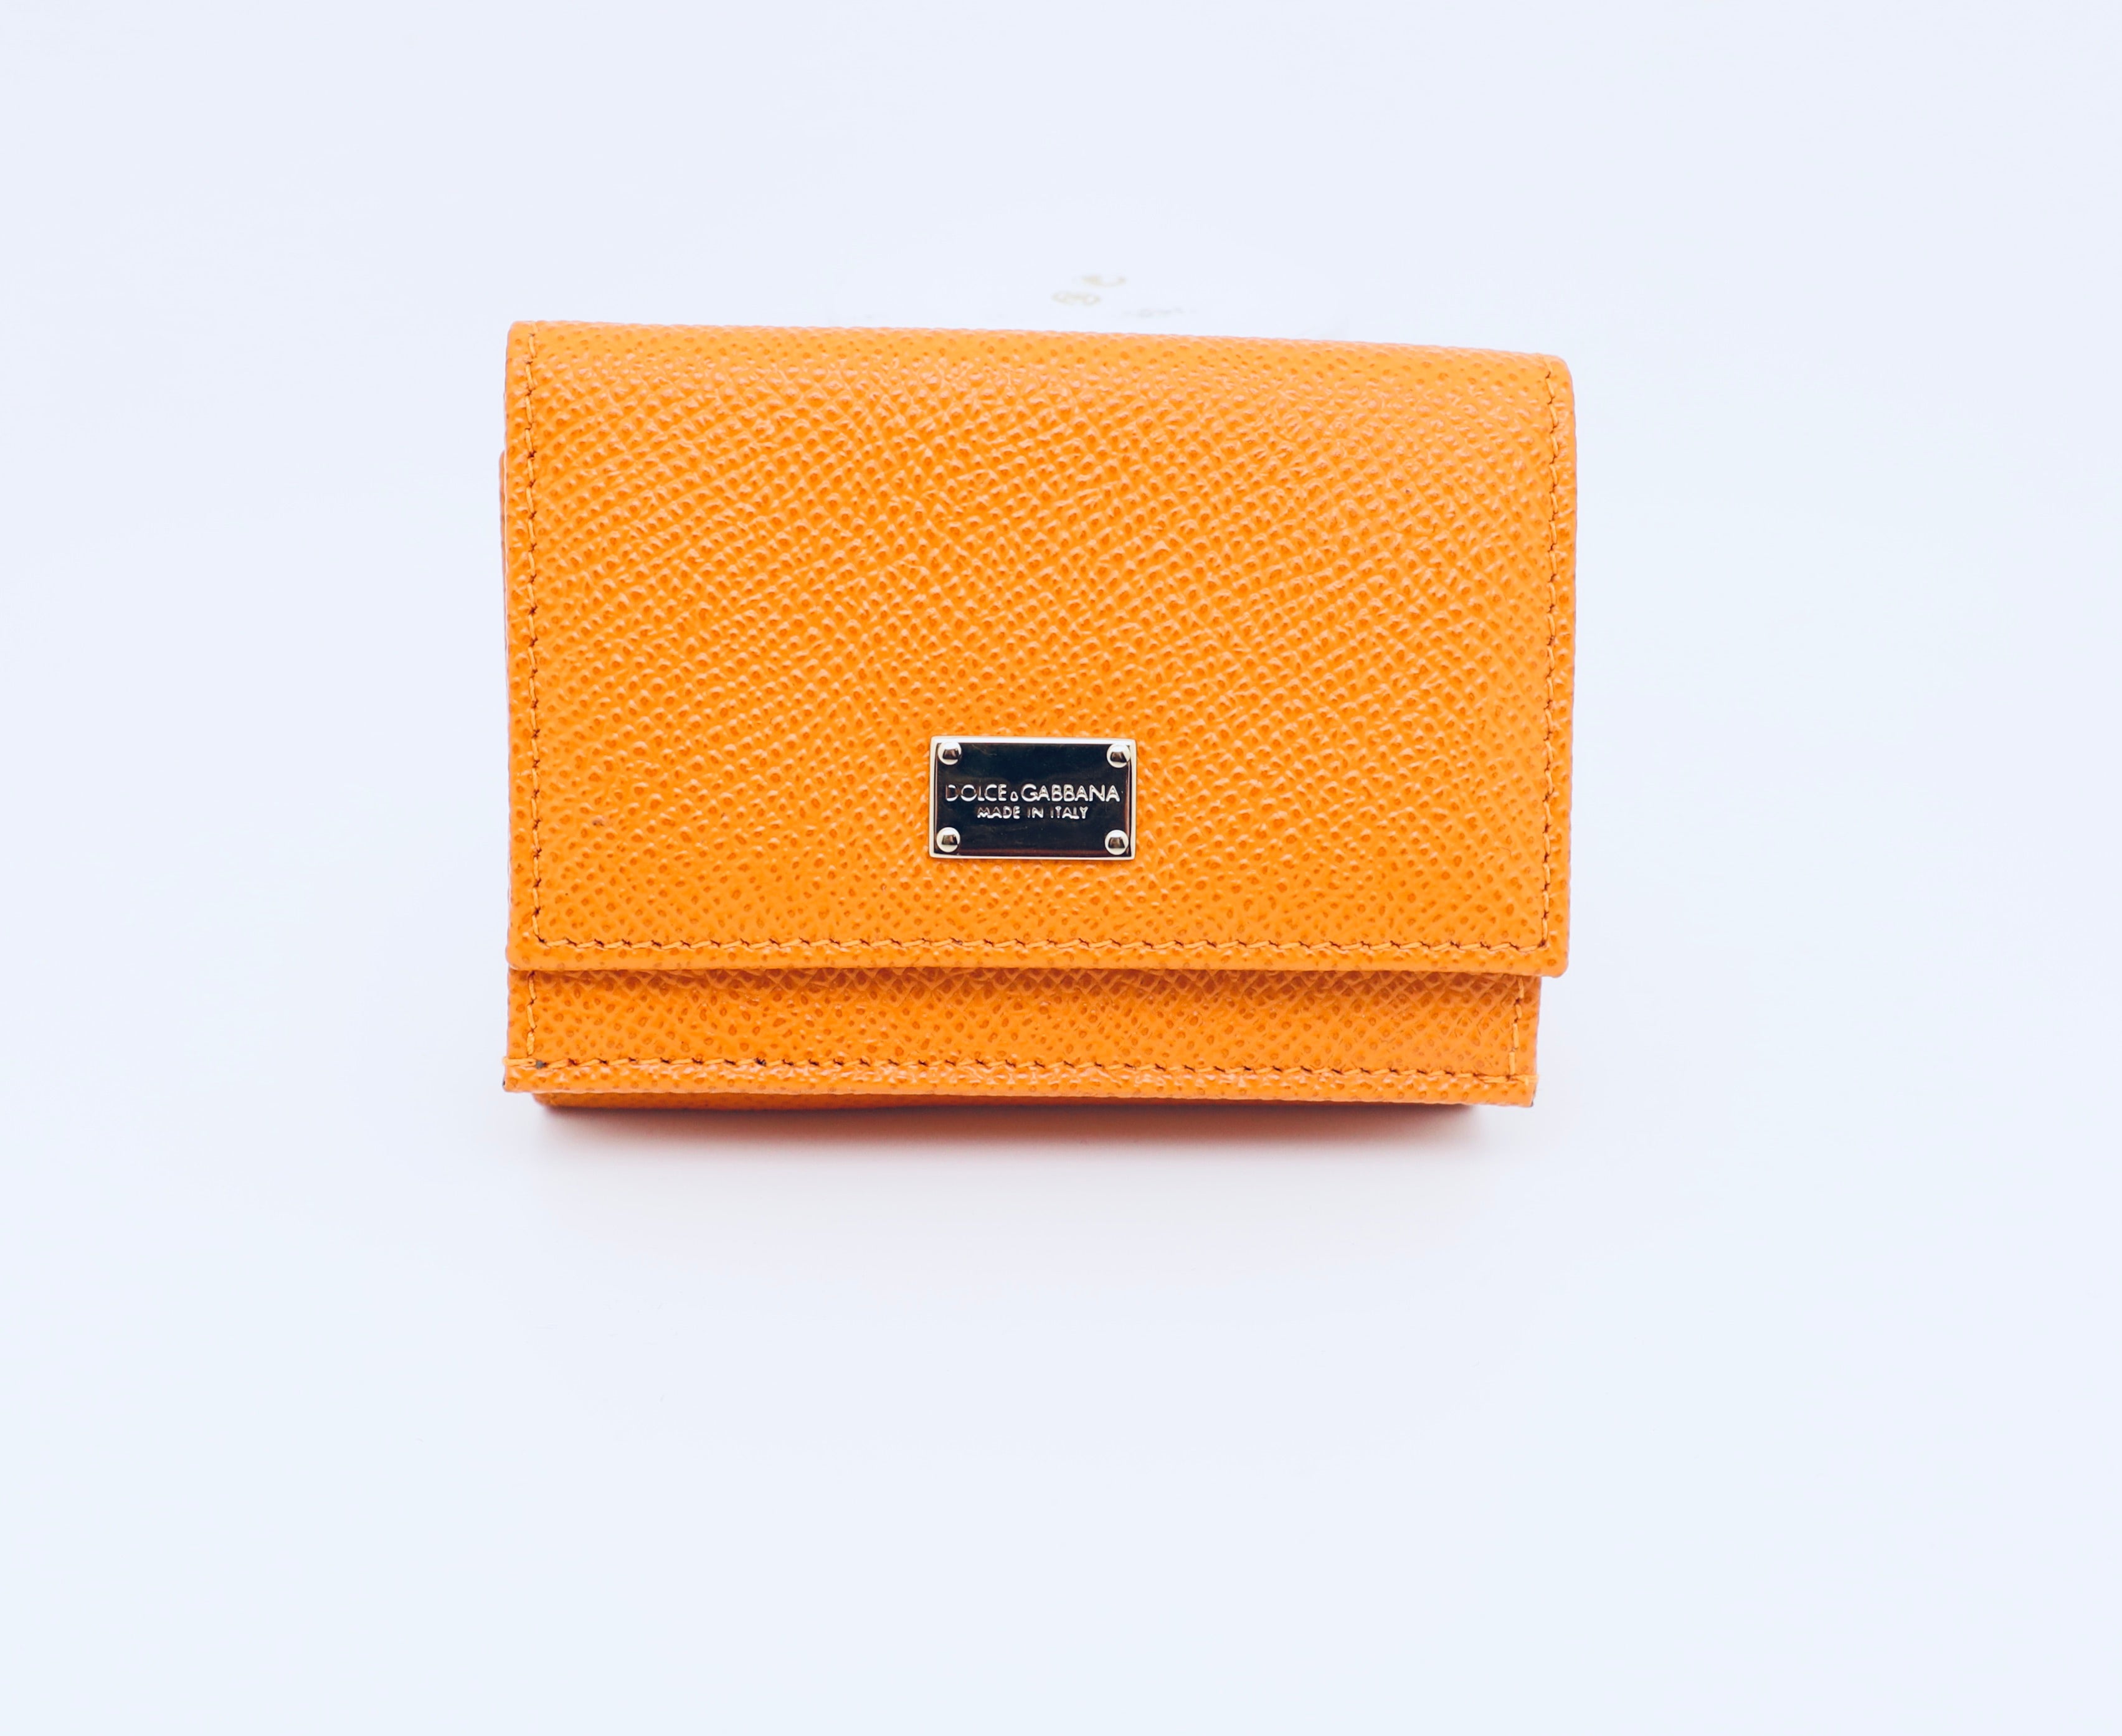 Dolce & Gabbana Orange Leather Trifold Compact Wallet